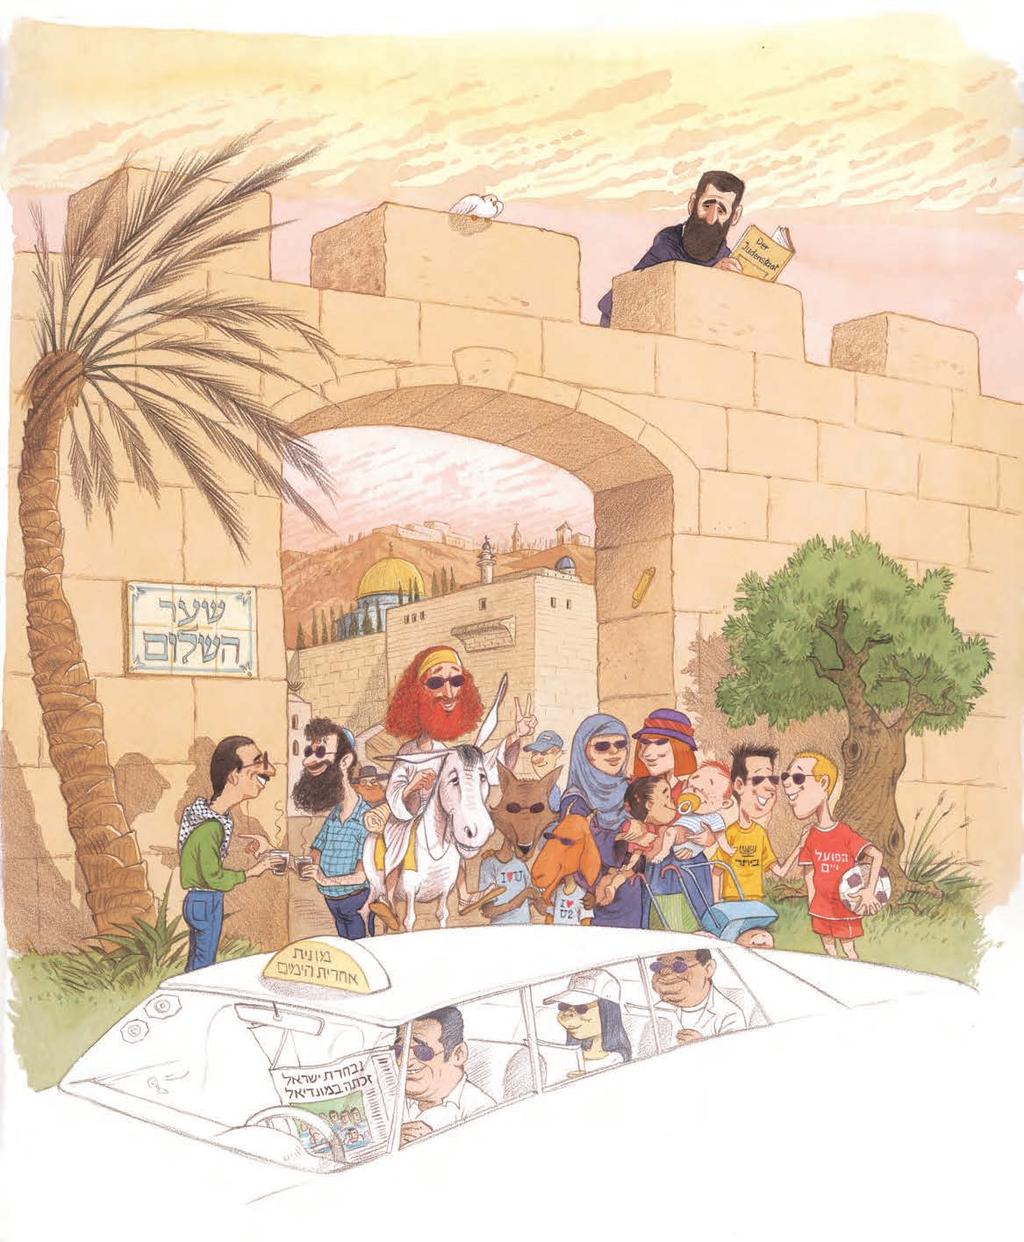 Download the collections of Passover Parodies and More Passover Parodies from the TBE website to continue to sing and